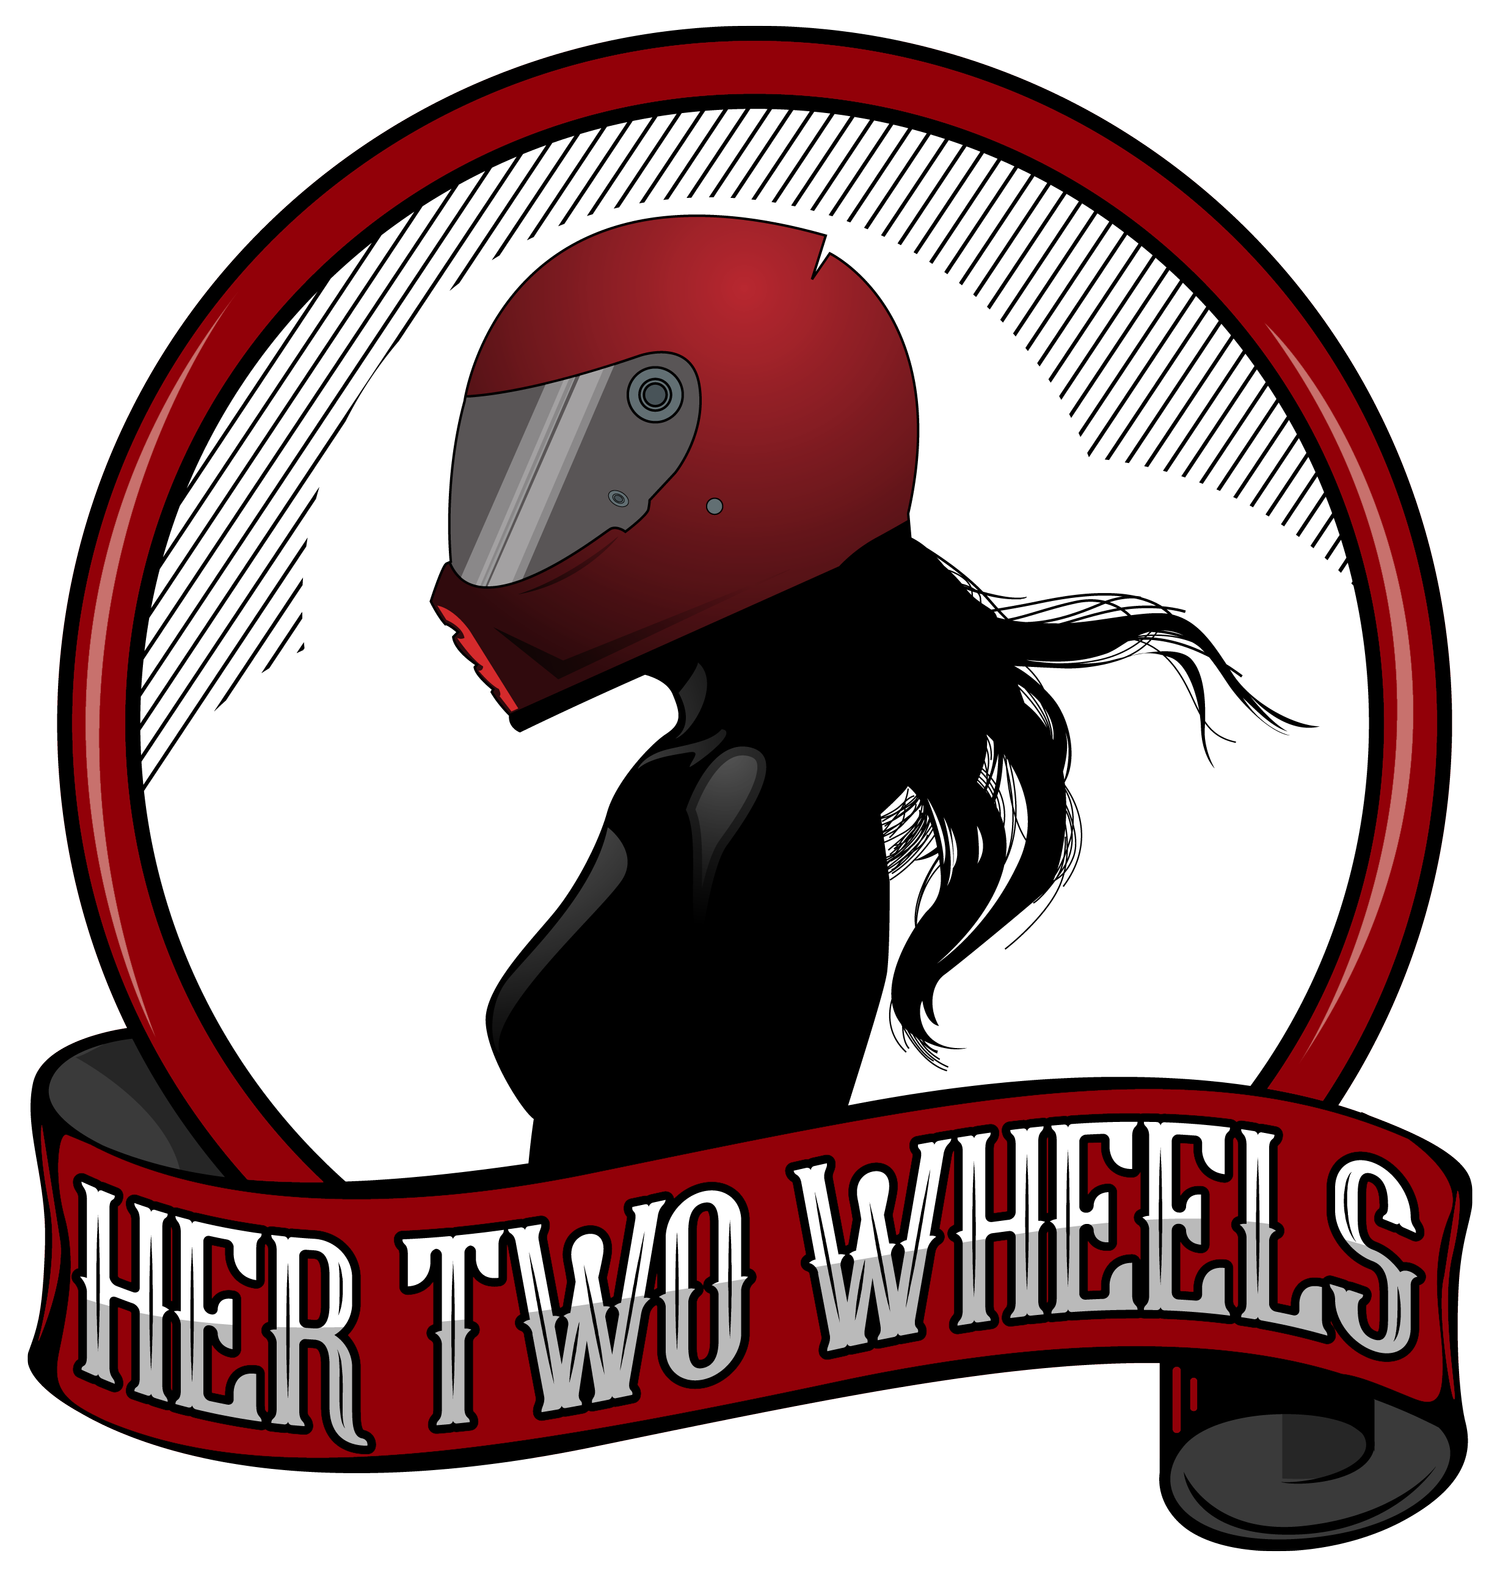 Her Two Wheels